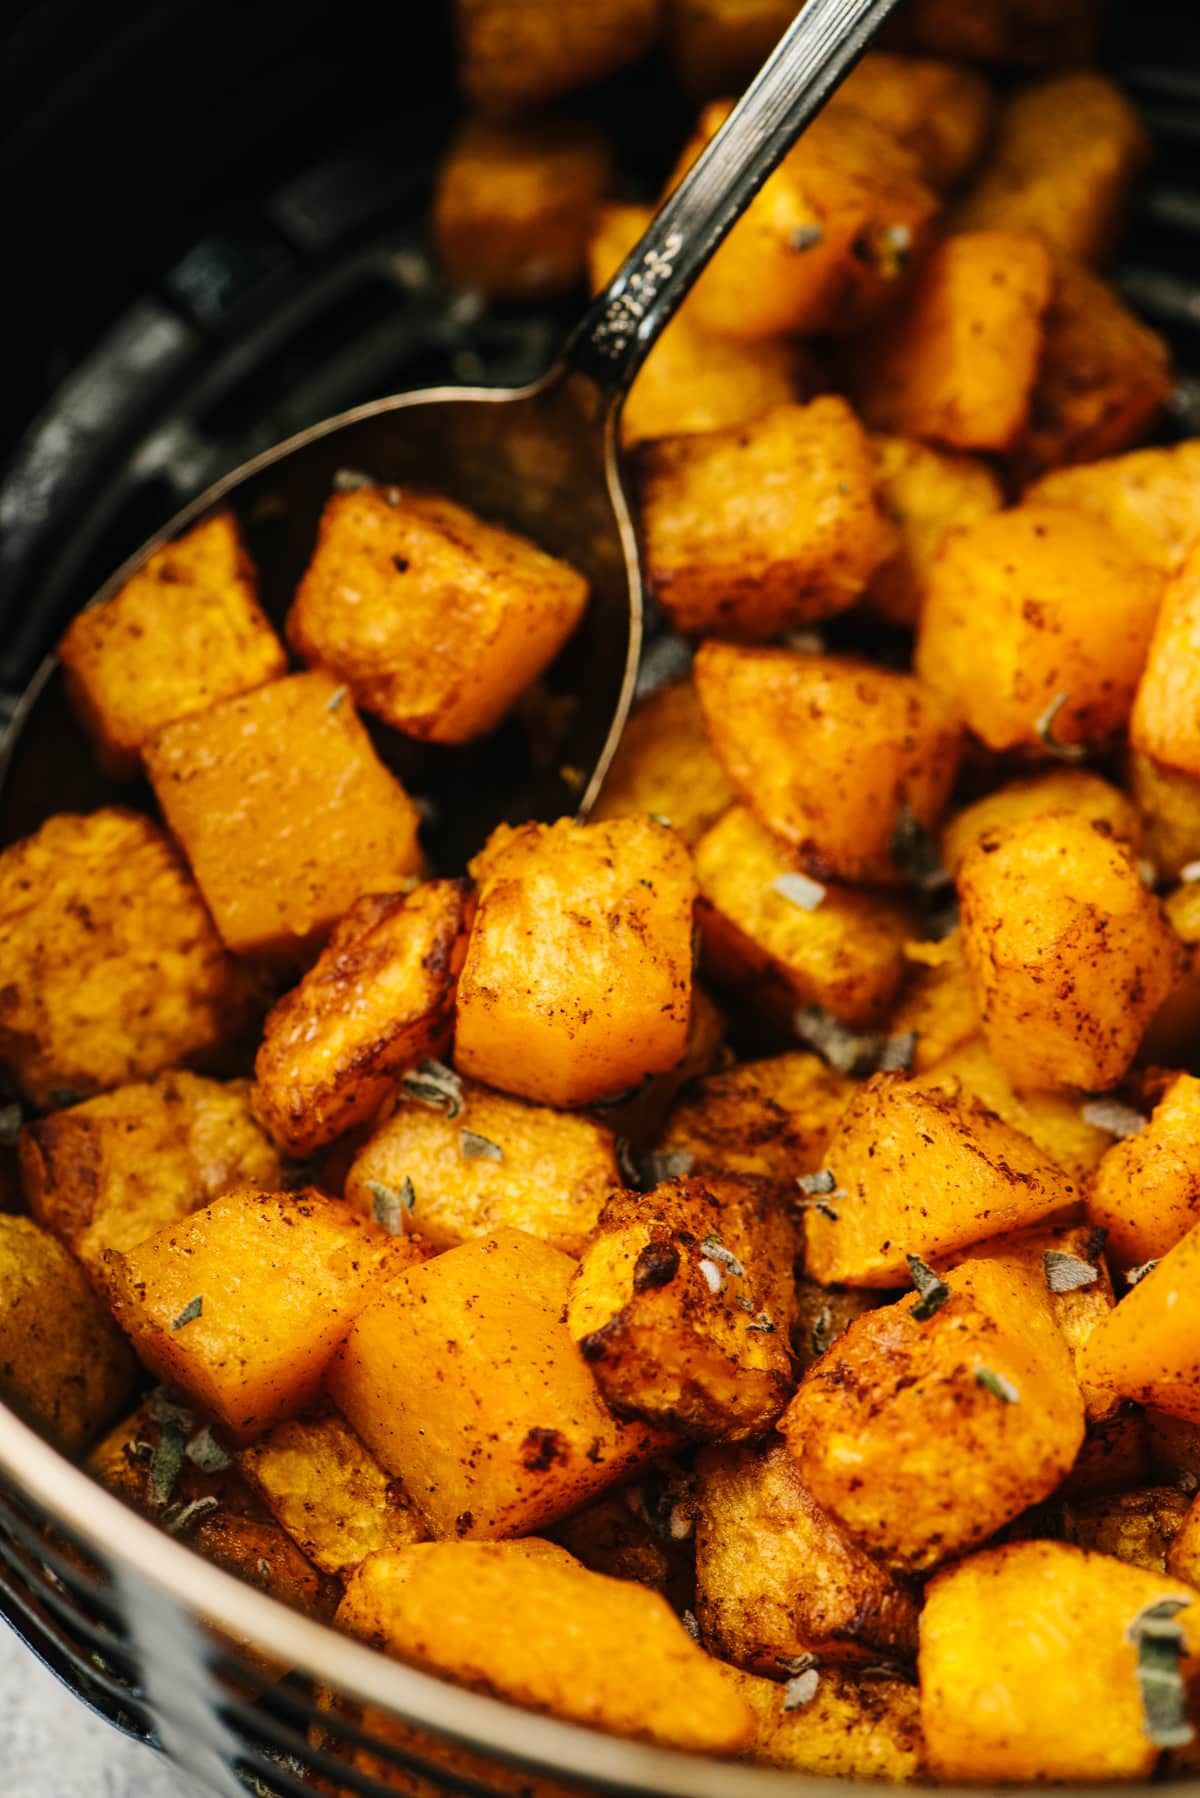 Roasted diced butternut squash in the basket of an air fryer with a vintage serving spoon, garnished with fresh sage.